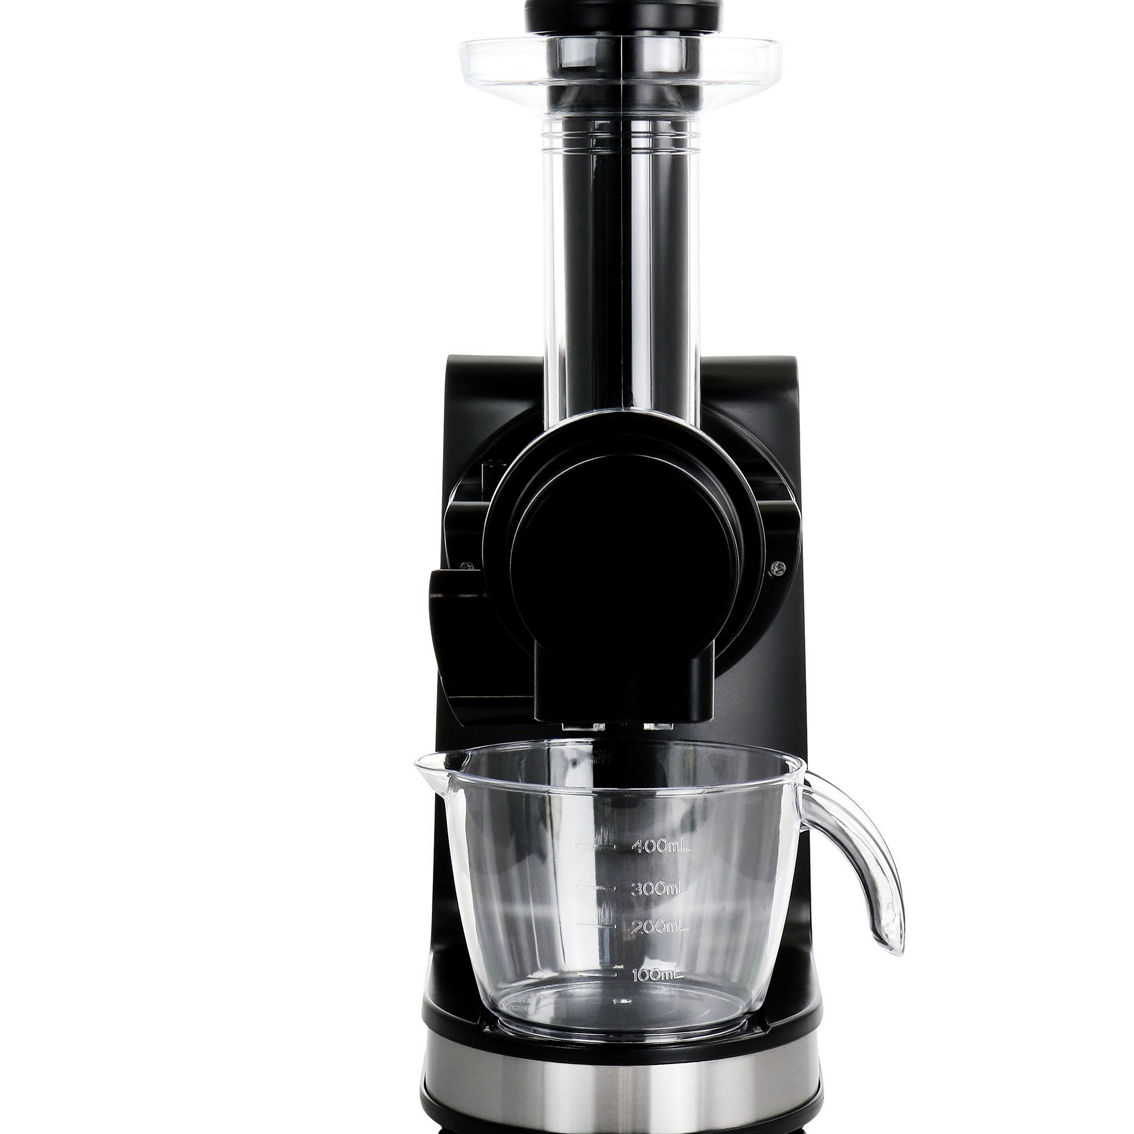 MegaChef Masticating Slow Juicer Extractor with Reverse Function, Cold Press Jui - Image 2 of 5